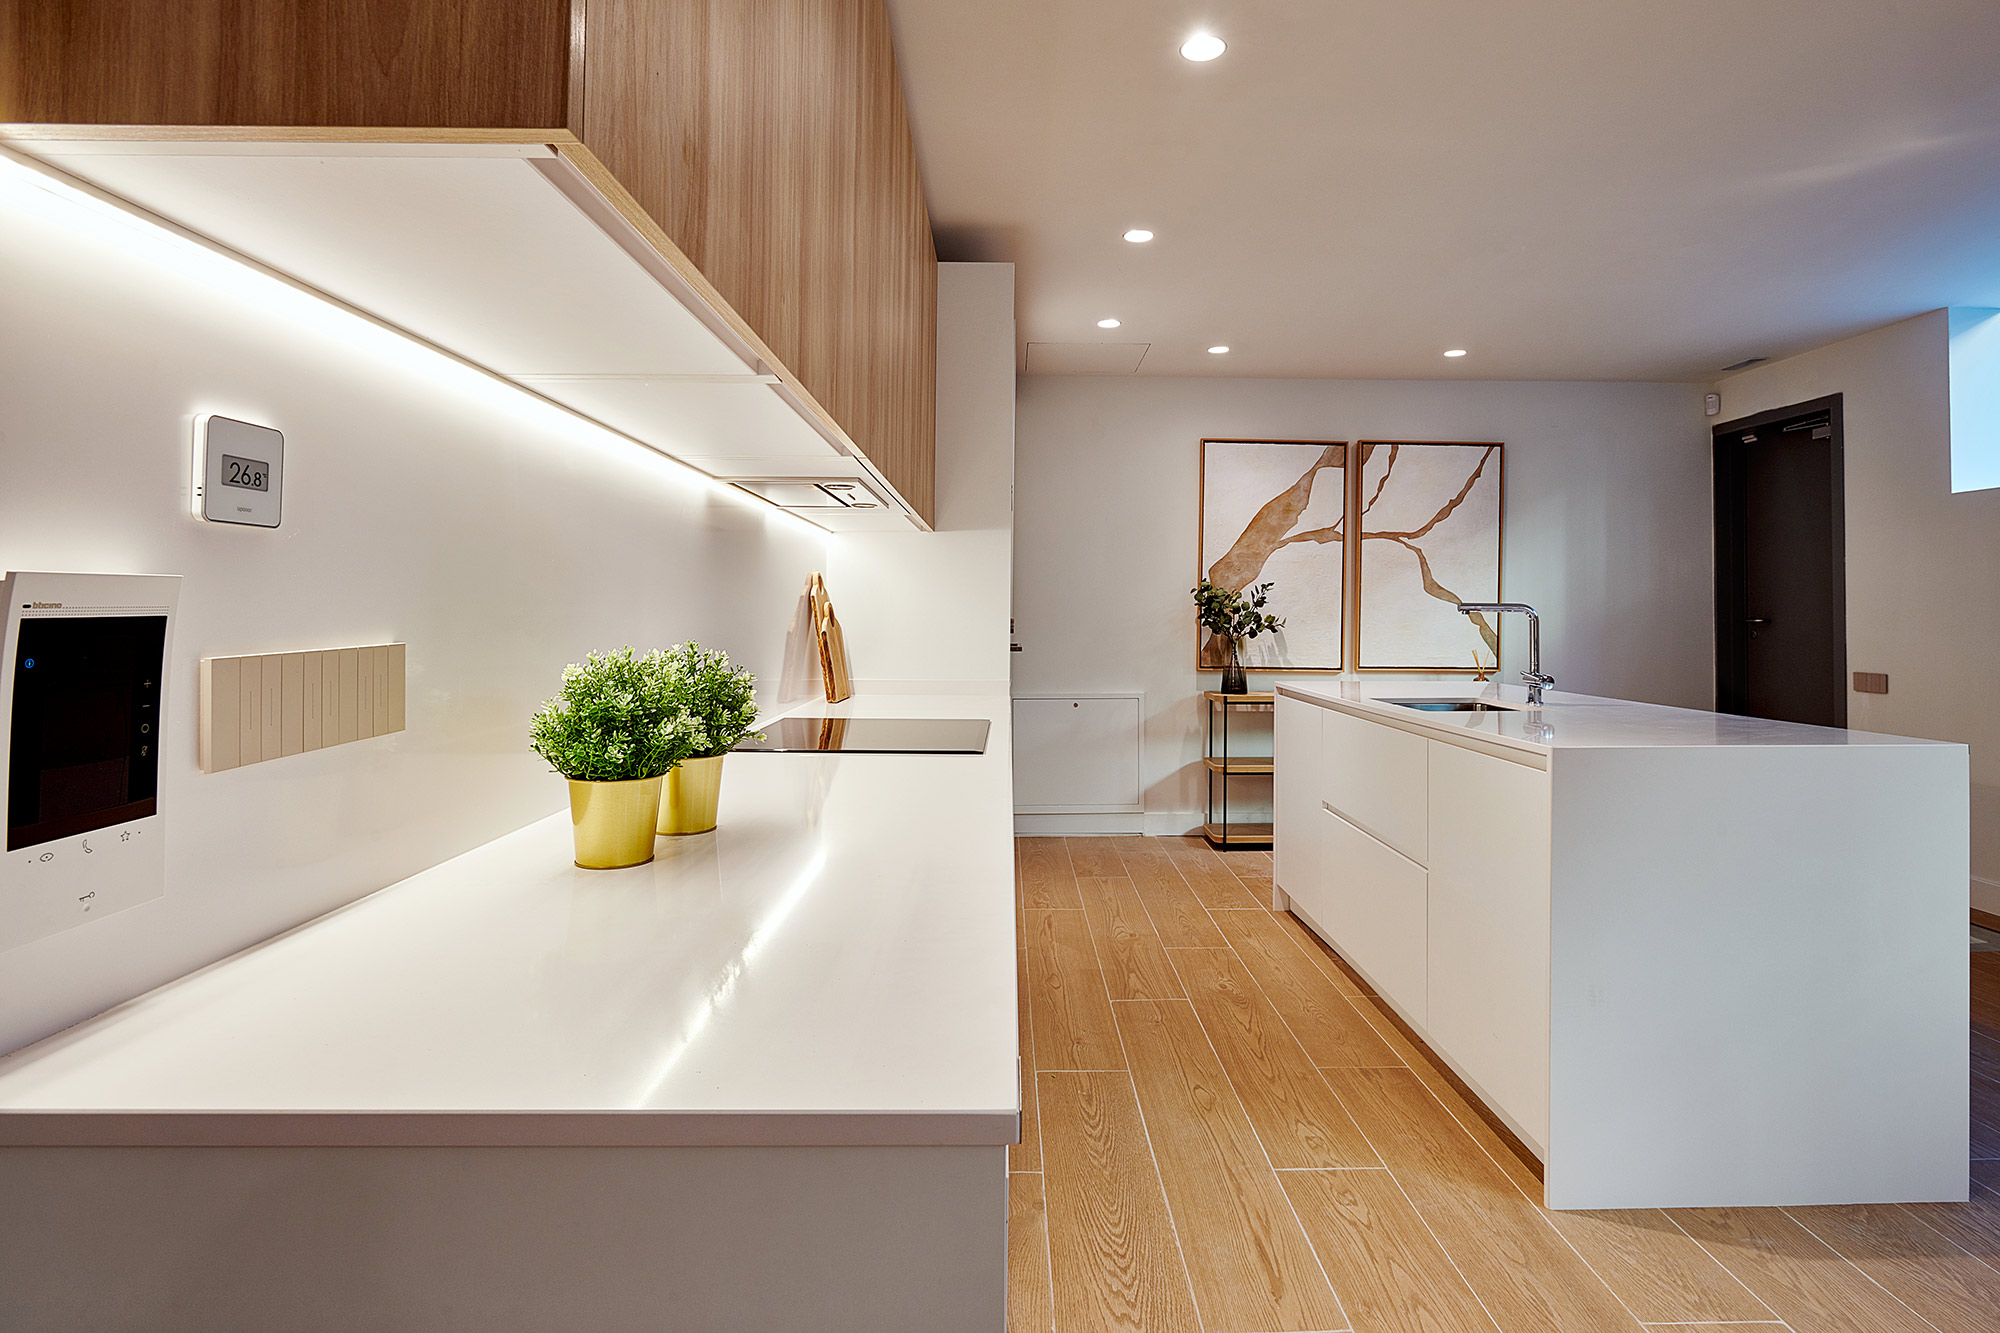 Image of aedas homes cocina silestone blanco zeus 7 in Cosentino, the star of the new functional, modern and sustainable house in the AEDAS Homes showroom in Madrid - Cosentino